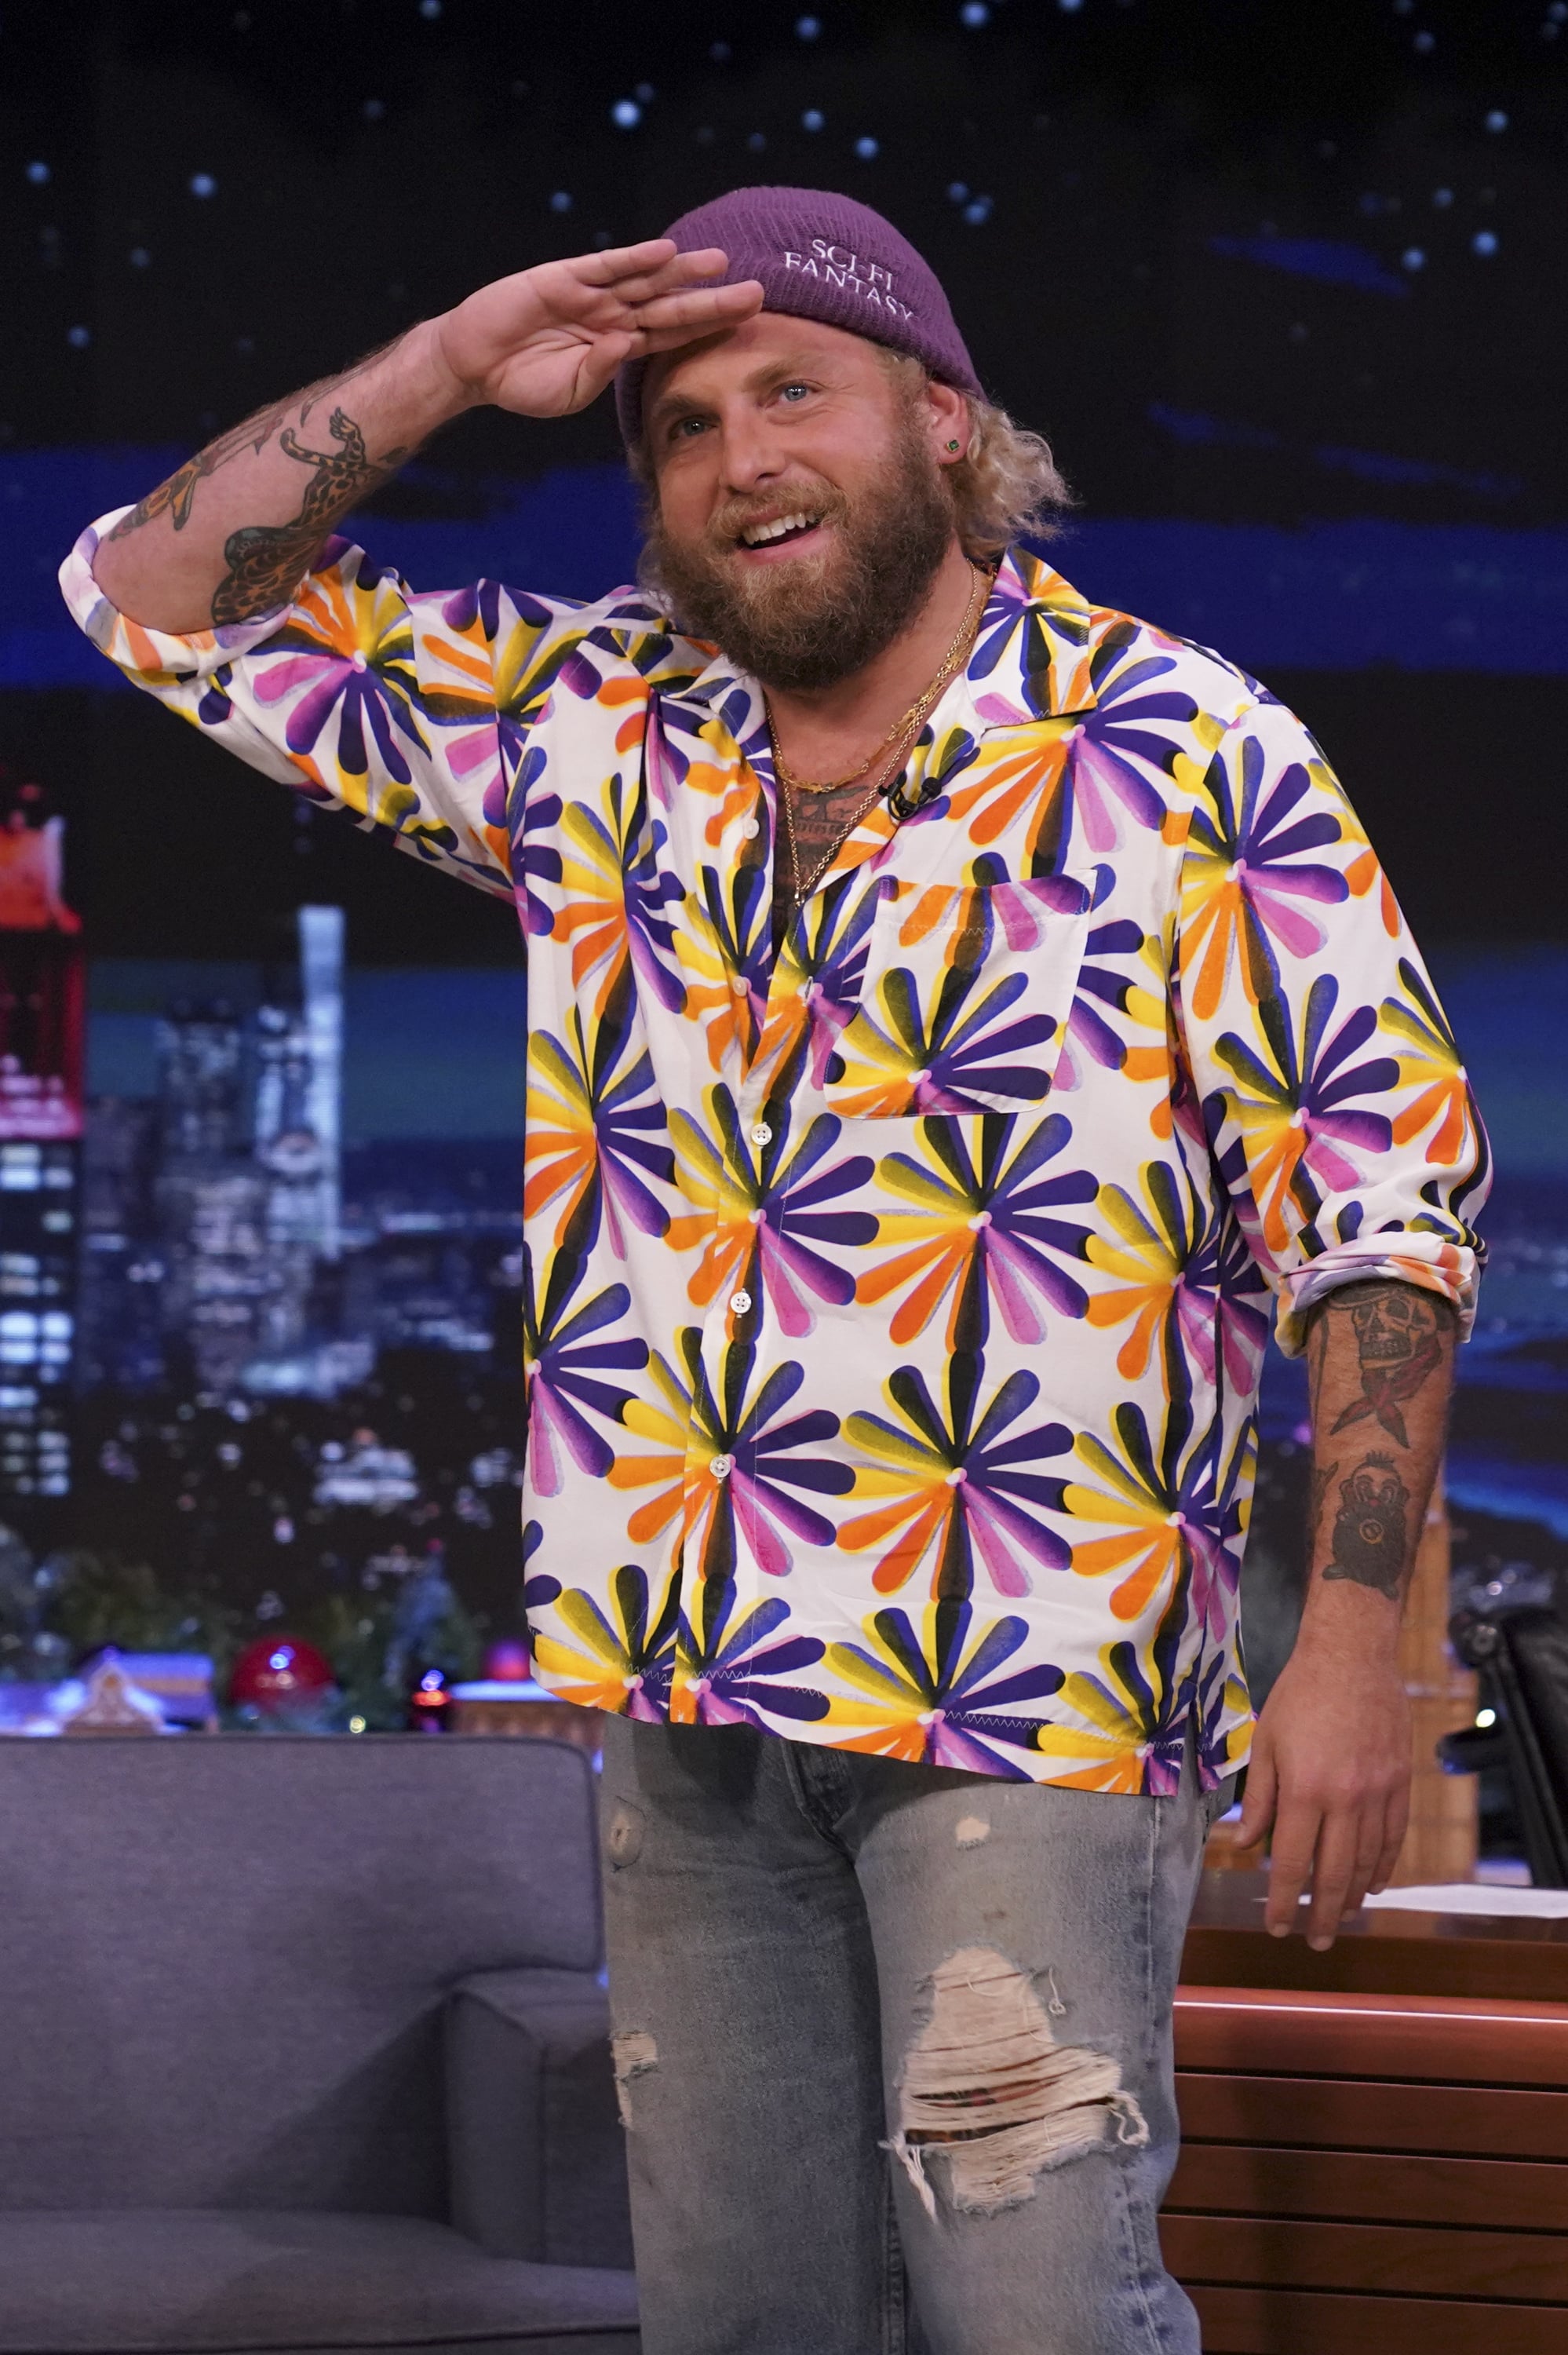 THE TONIGHT SHOW STARRING JIMMY FALLON -- Episode 1565 -- Pictured: Actor Jonah Hill arrives on Monday, December 6, 2021 -- (Photo by: Rosalind OConnor/NBC/NBCU Photo Bank via Getty Images)